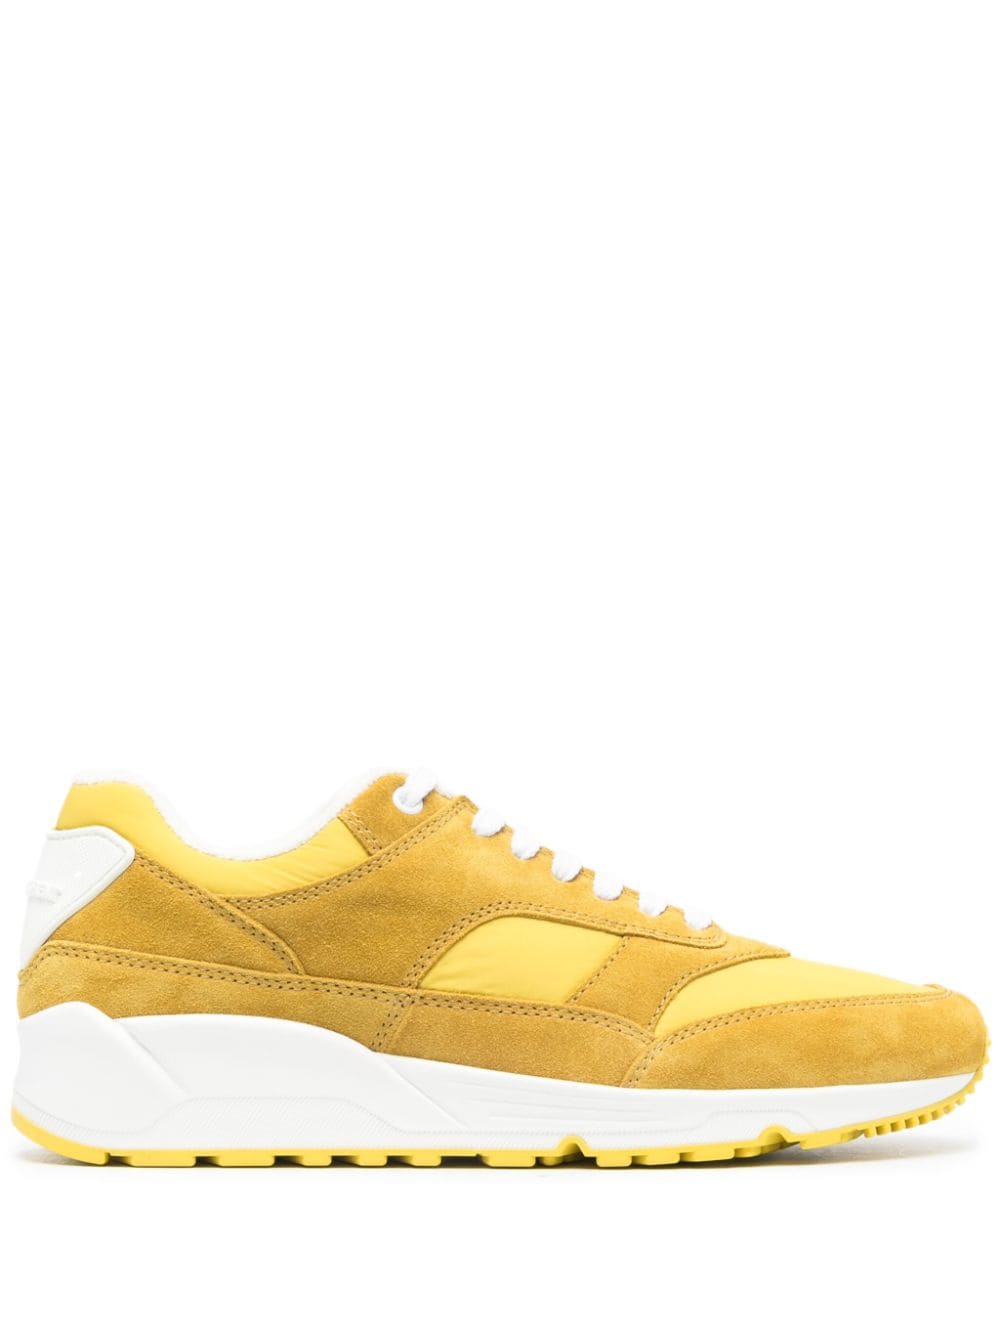 Saint Laurent Bump Leather Trainers In Mustard Yellow